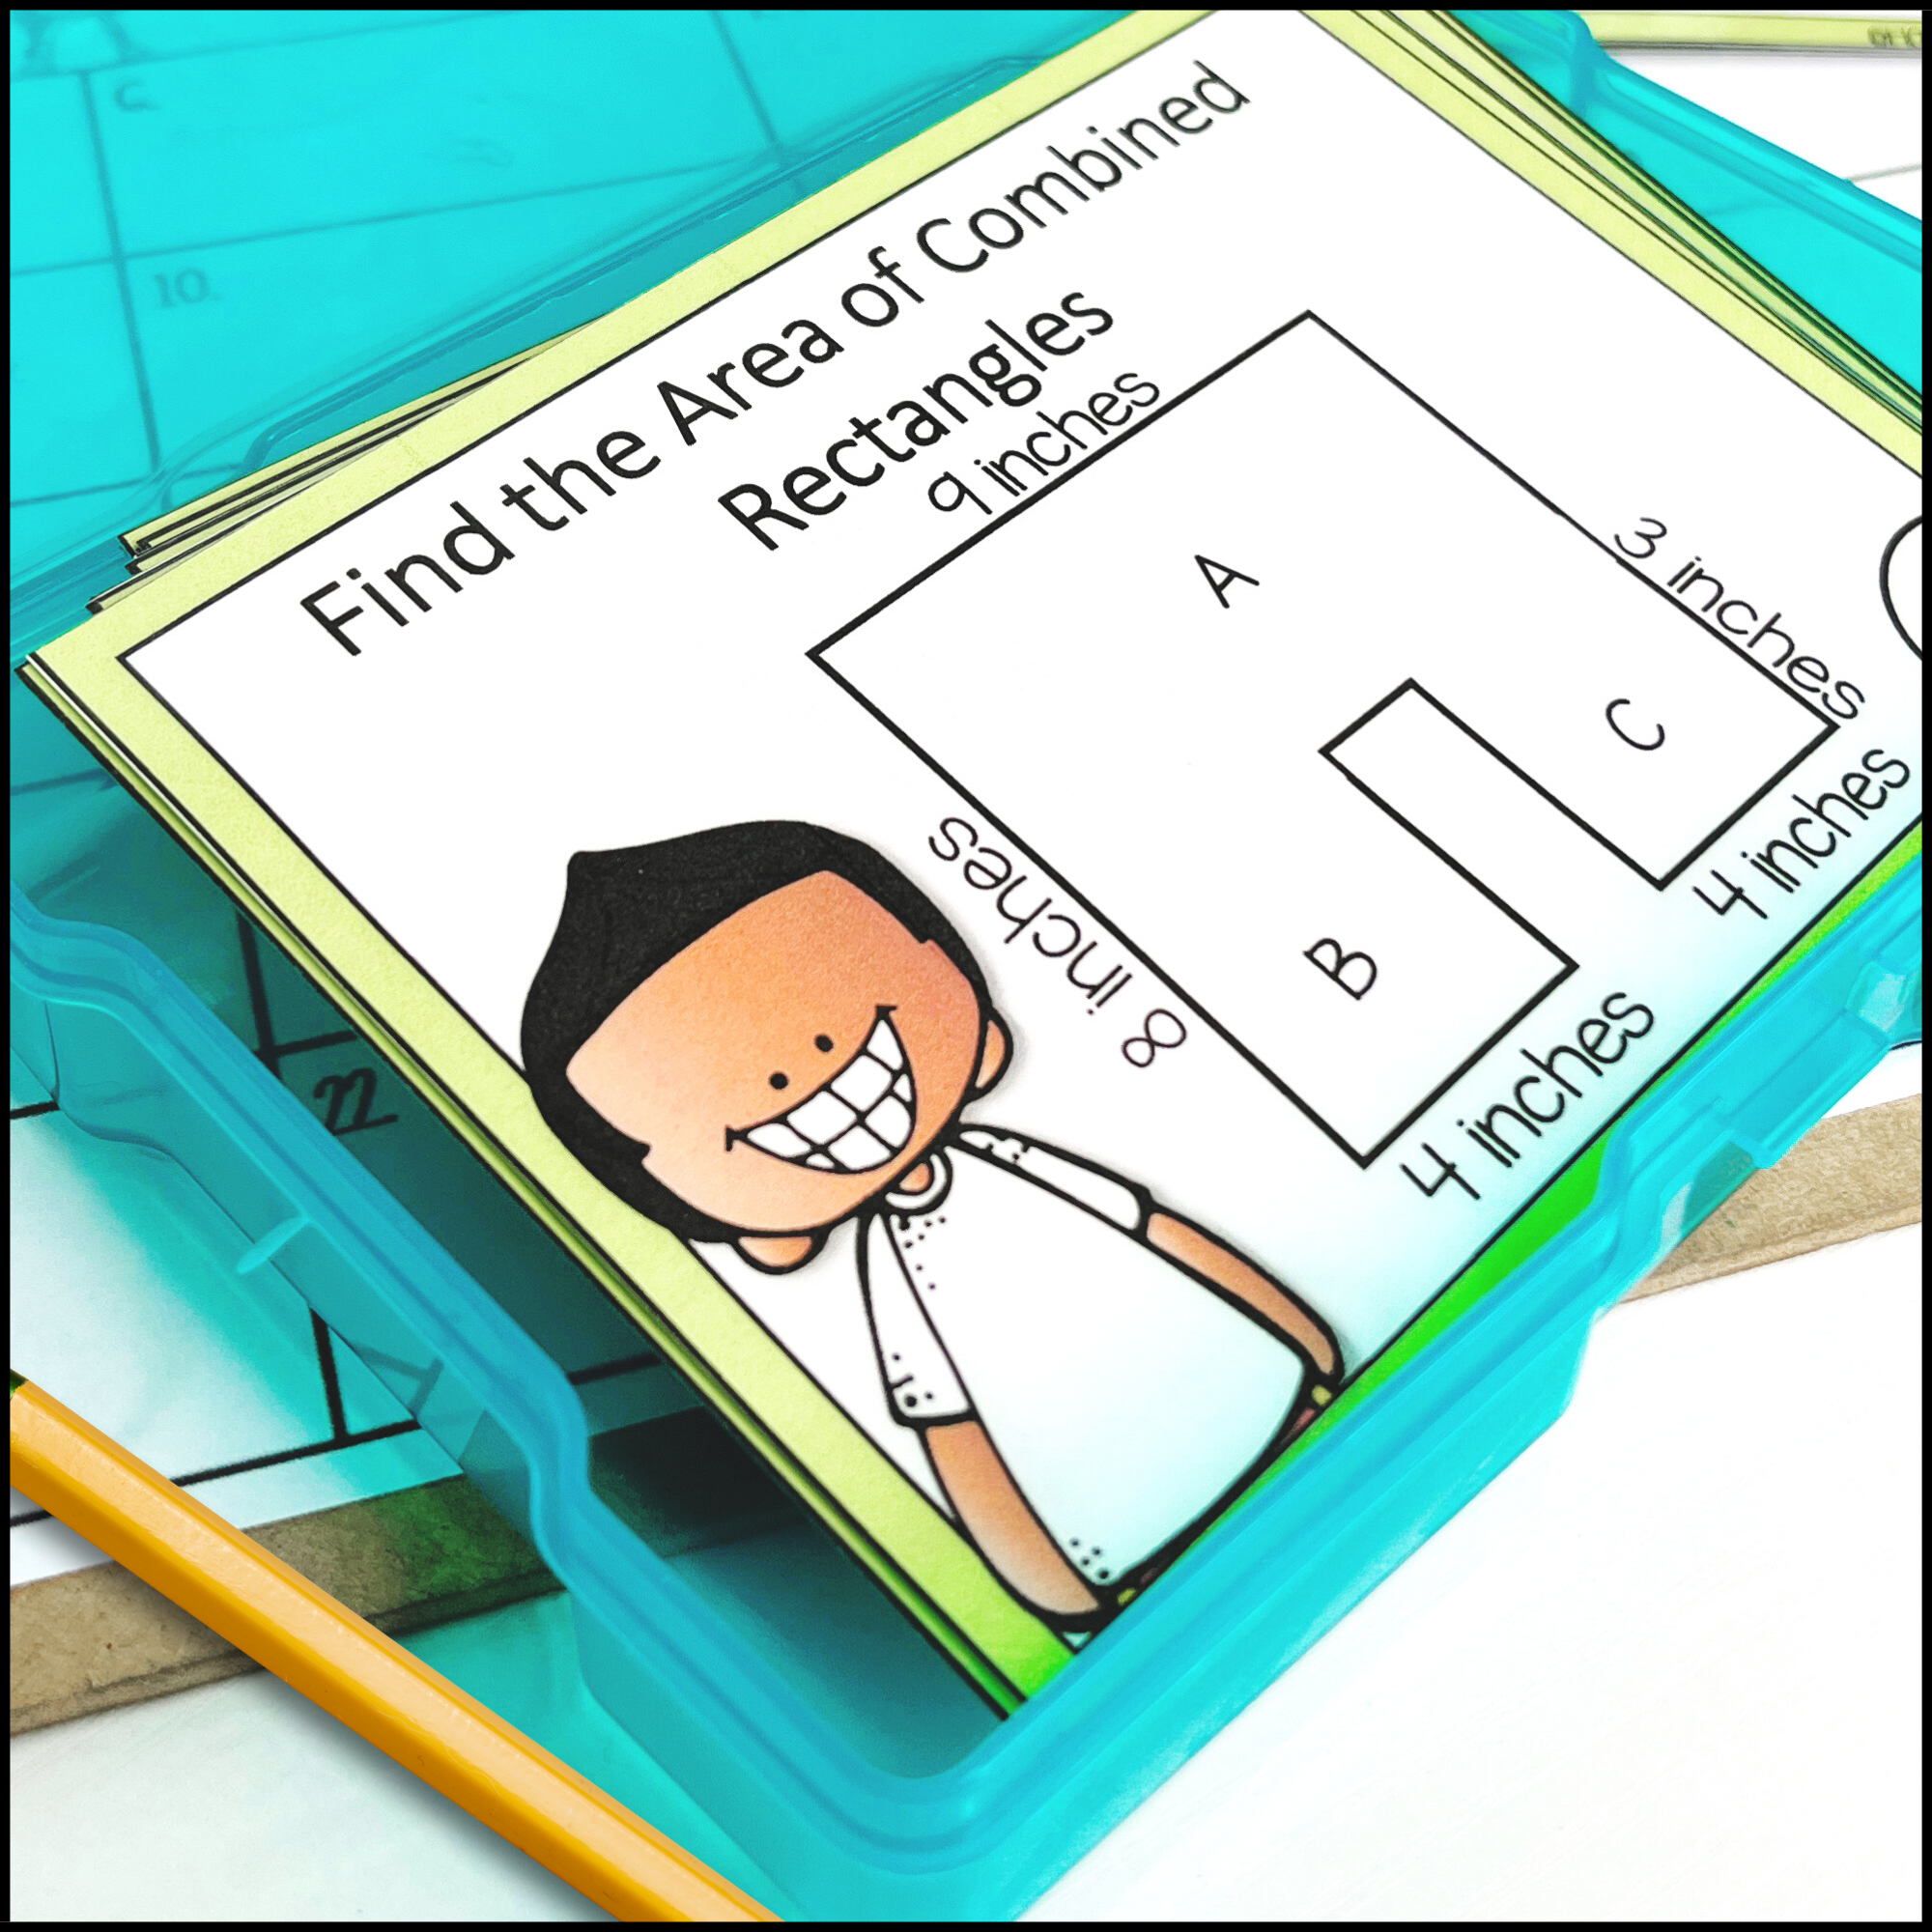 4th grade math review task cards used in upper elementary classrooms